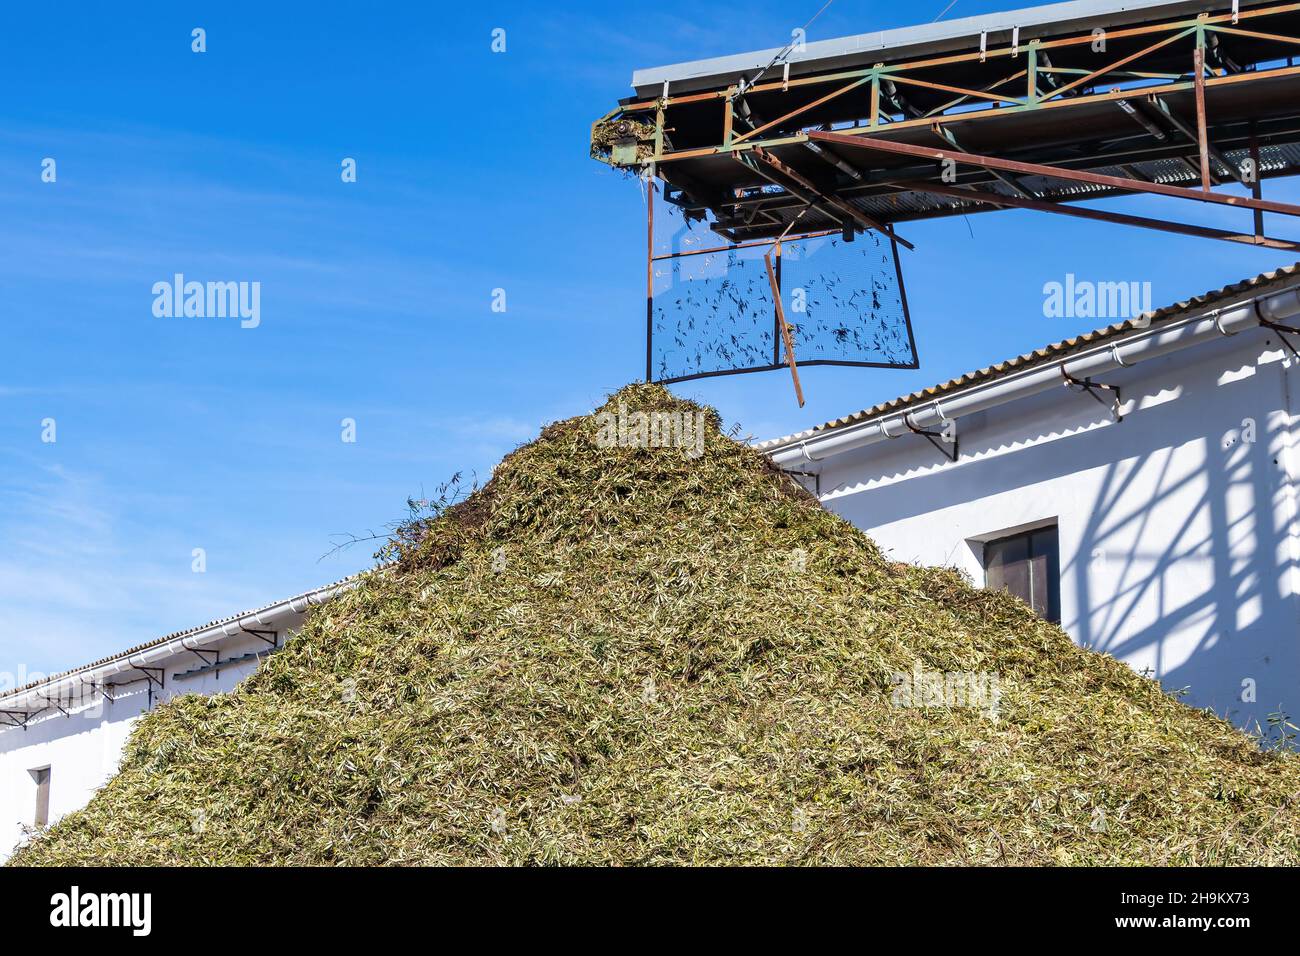 Conveyor belt that discards the branches of olives in the production of olive oil Stock Photo